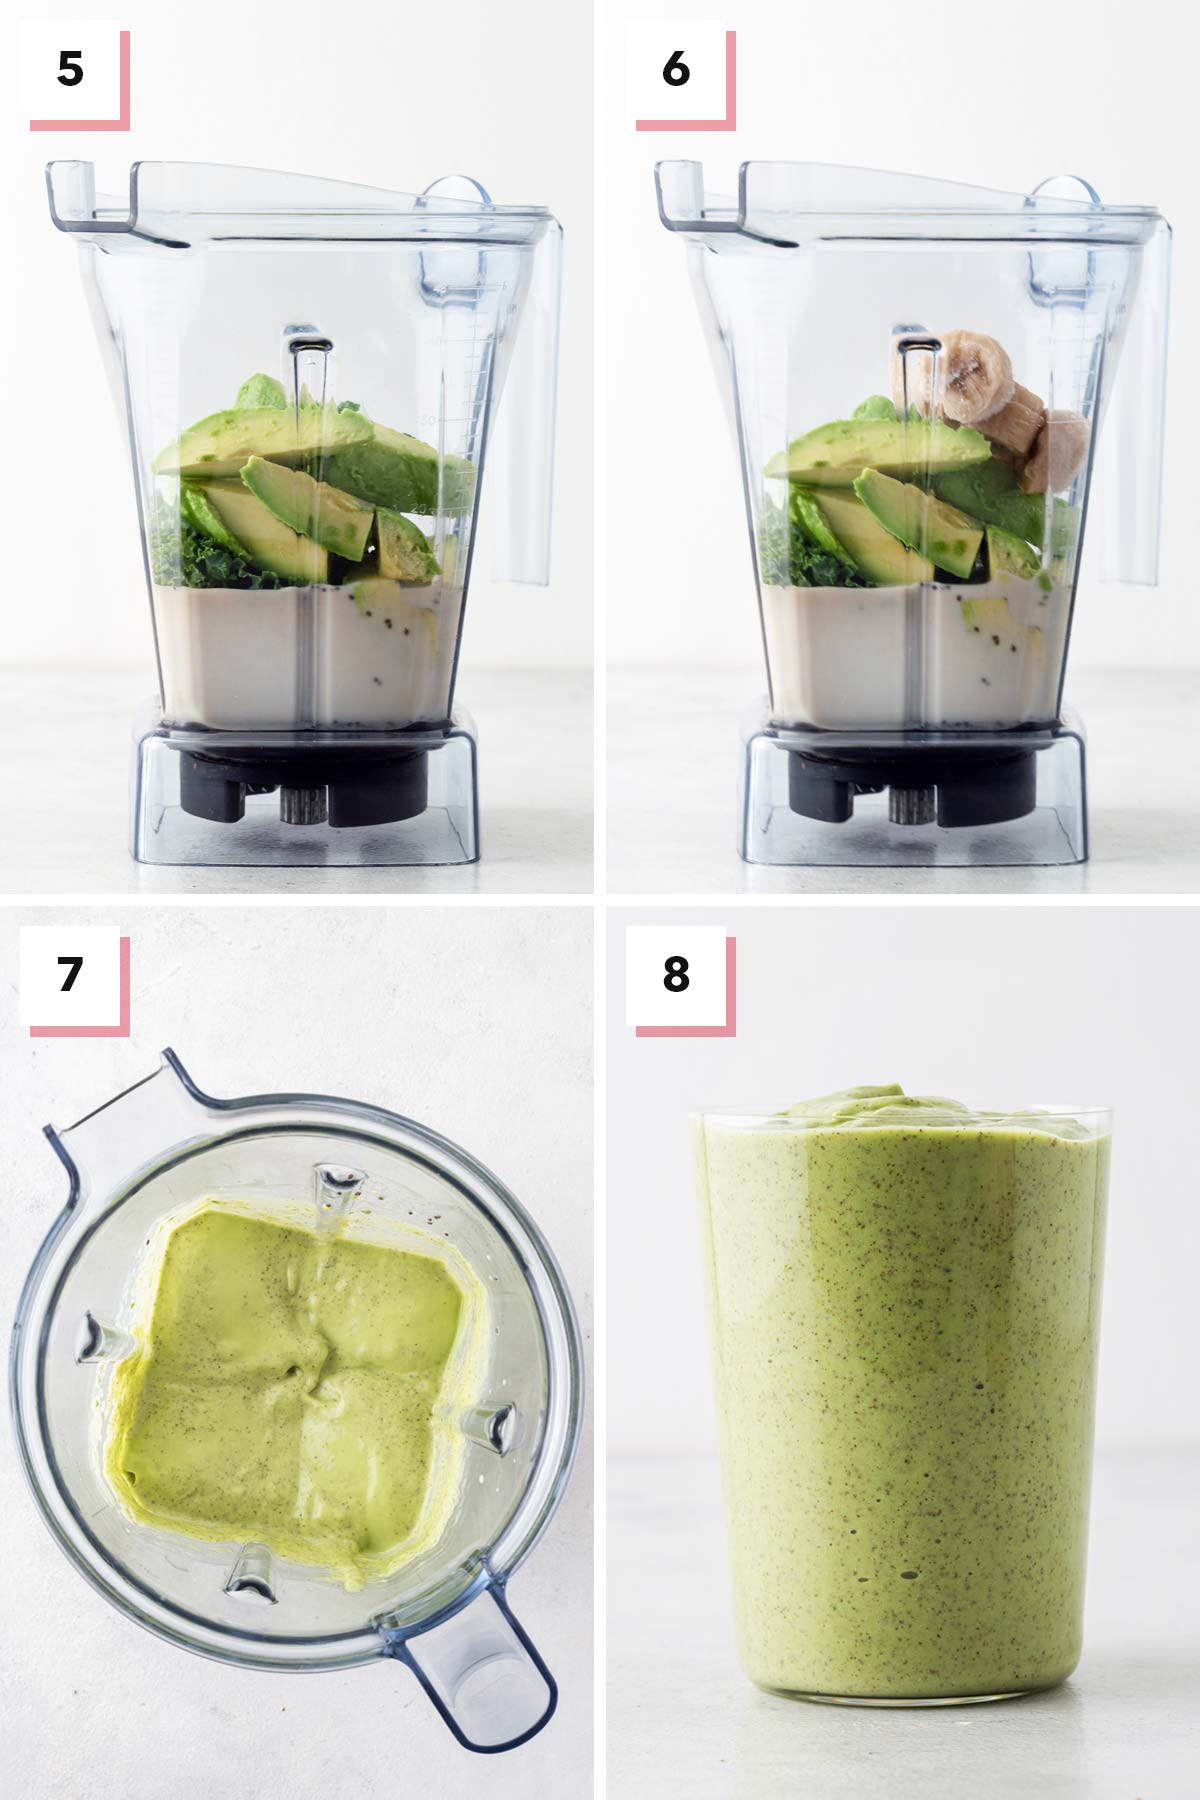 Final steps for making an avocado smoothie.